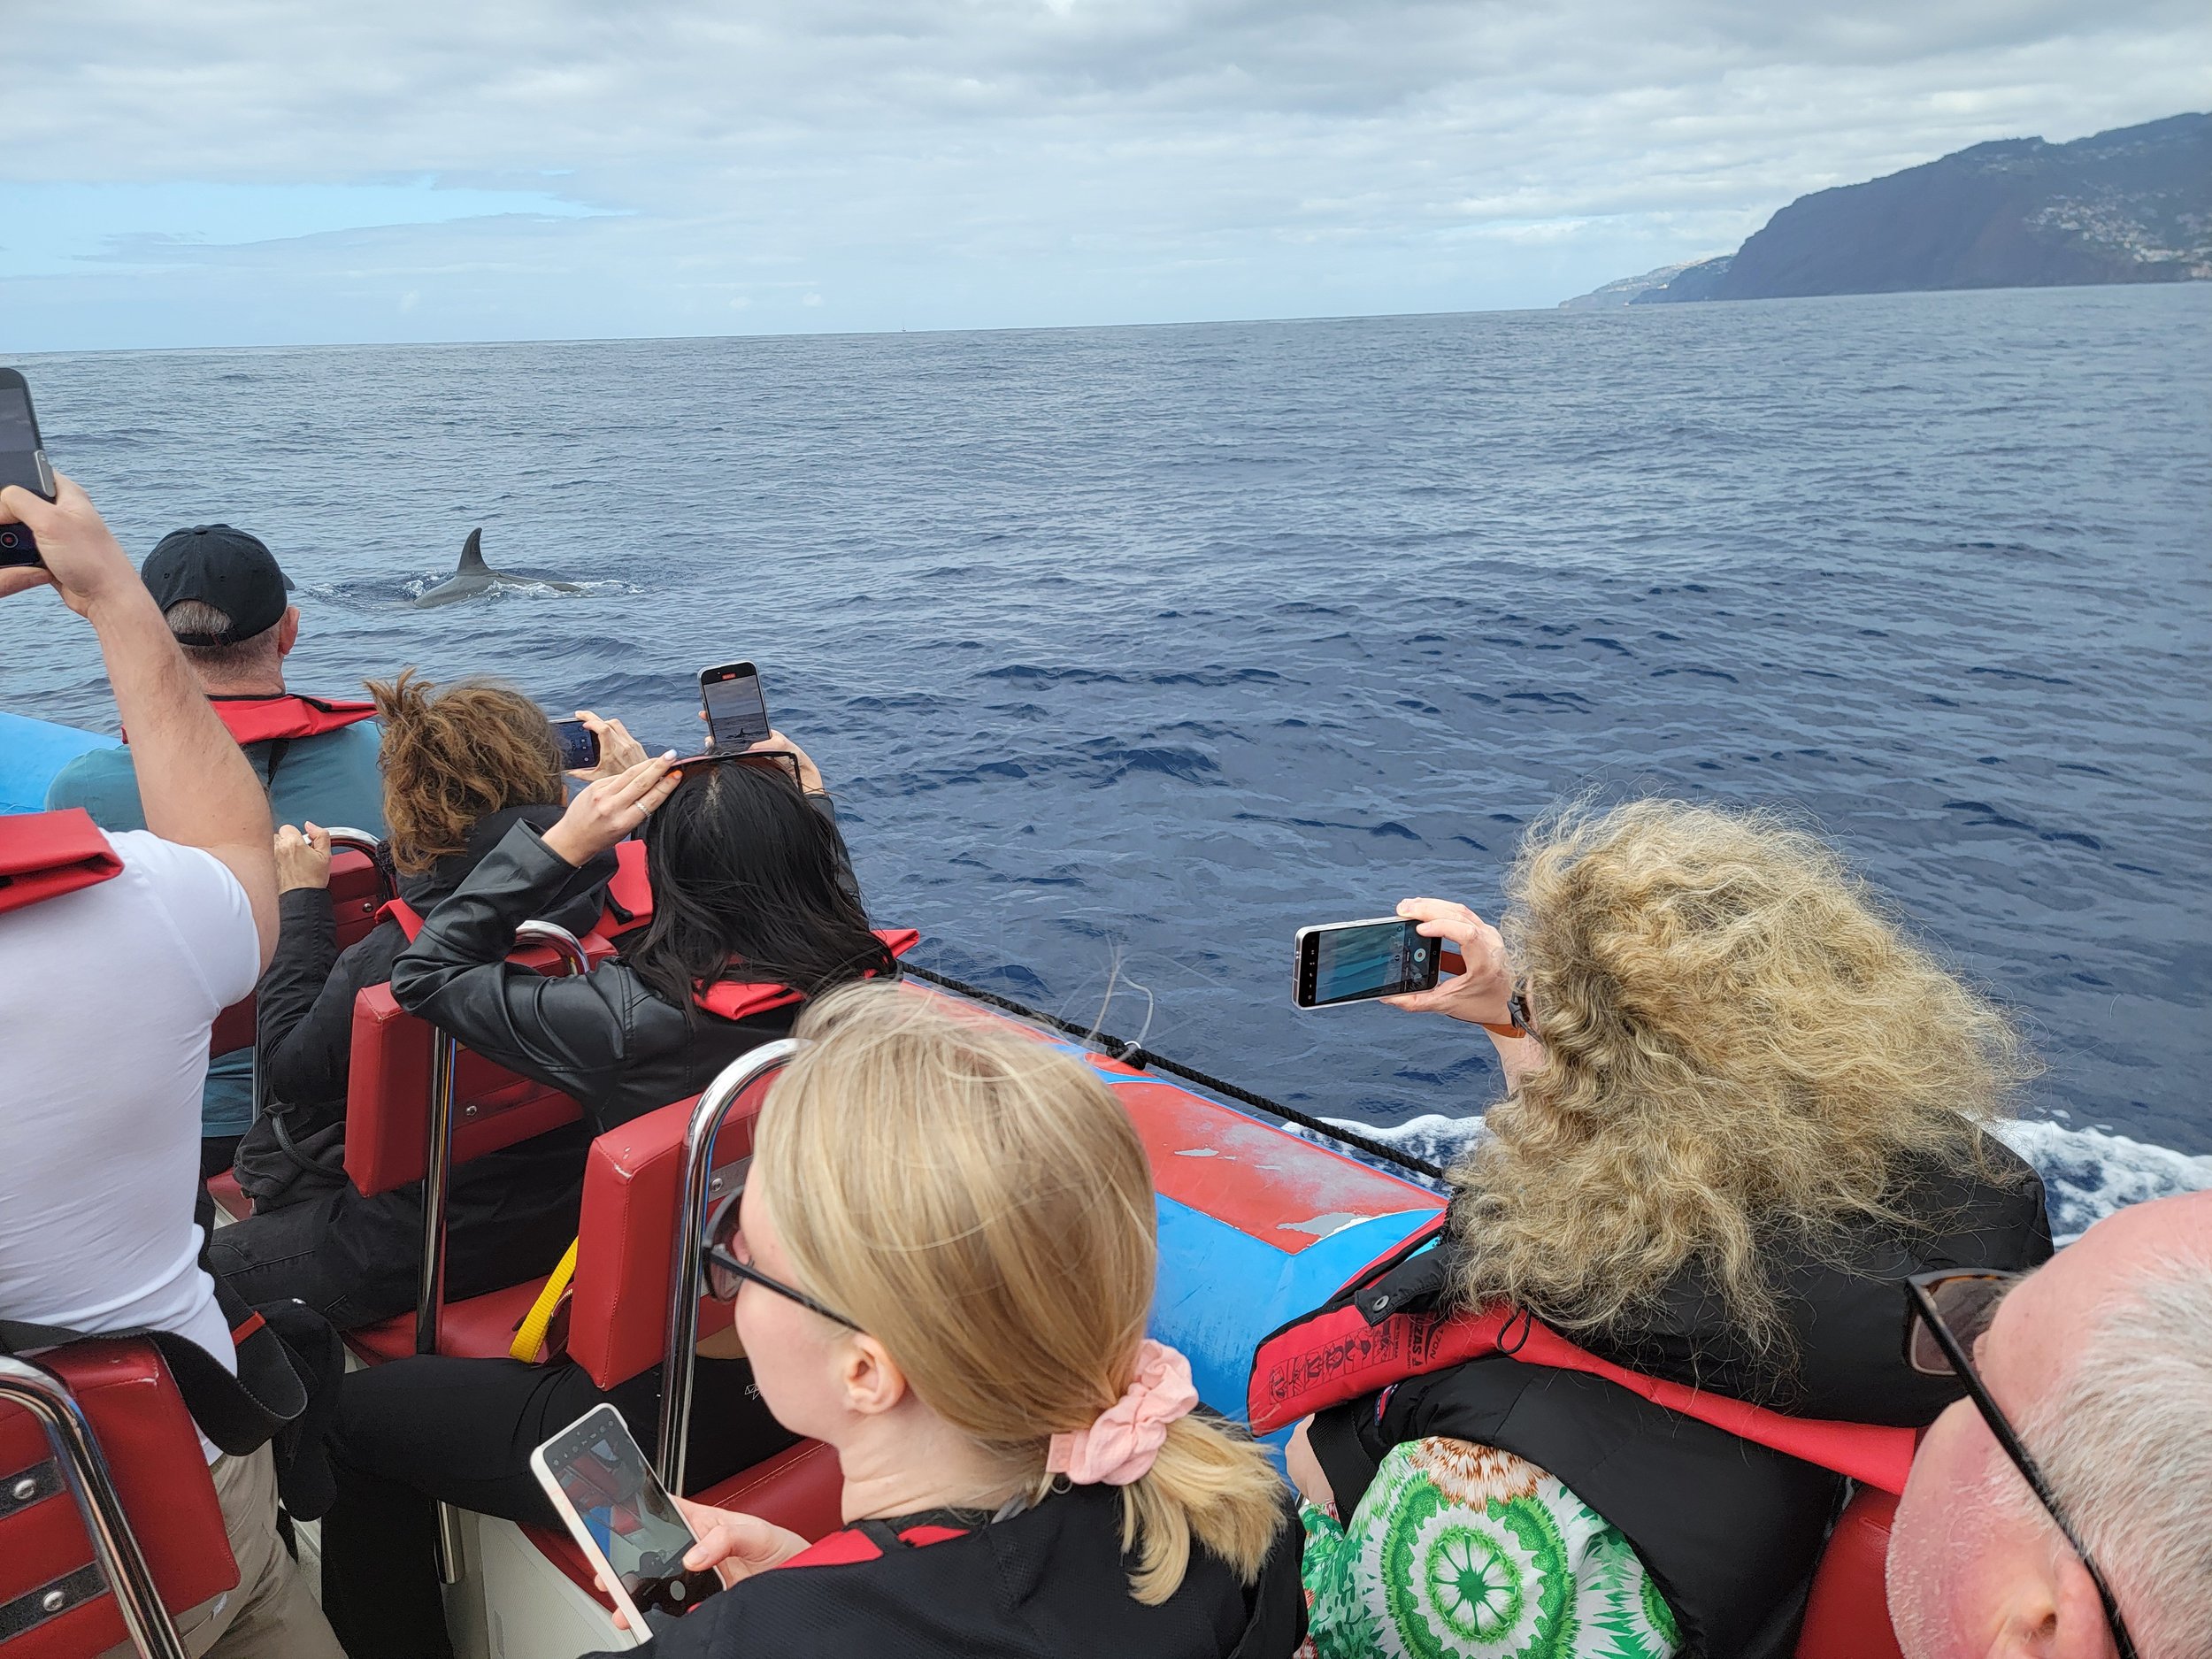 Zodiac tours are the best. Get to whales fast and you are nearest to the water and animals.